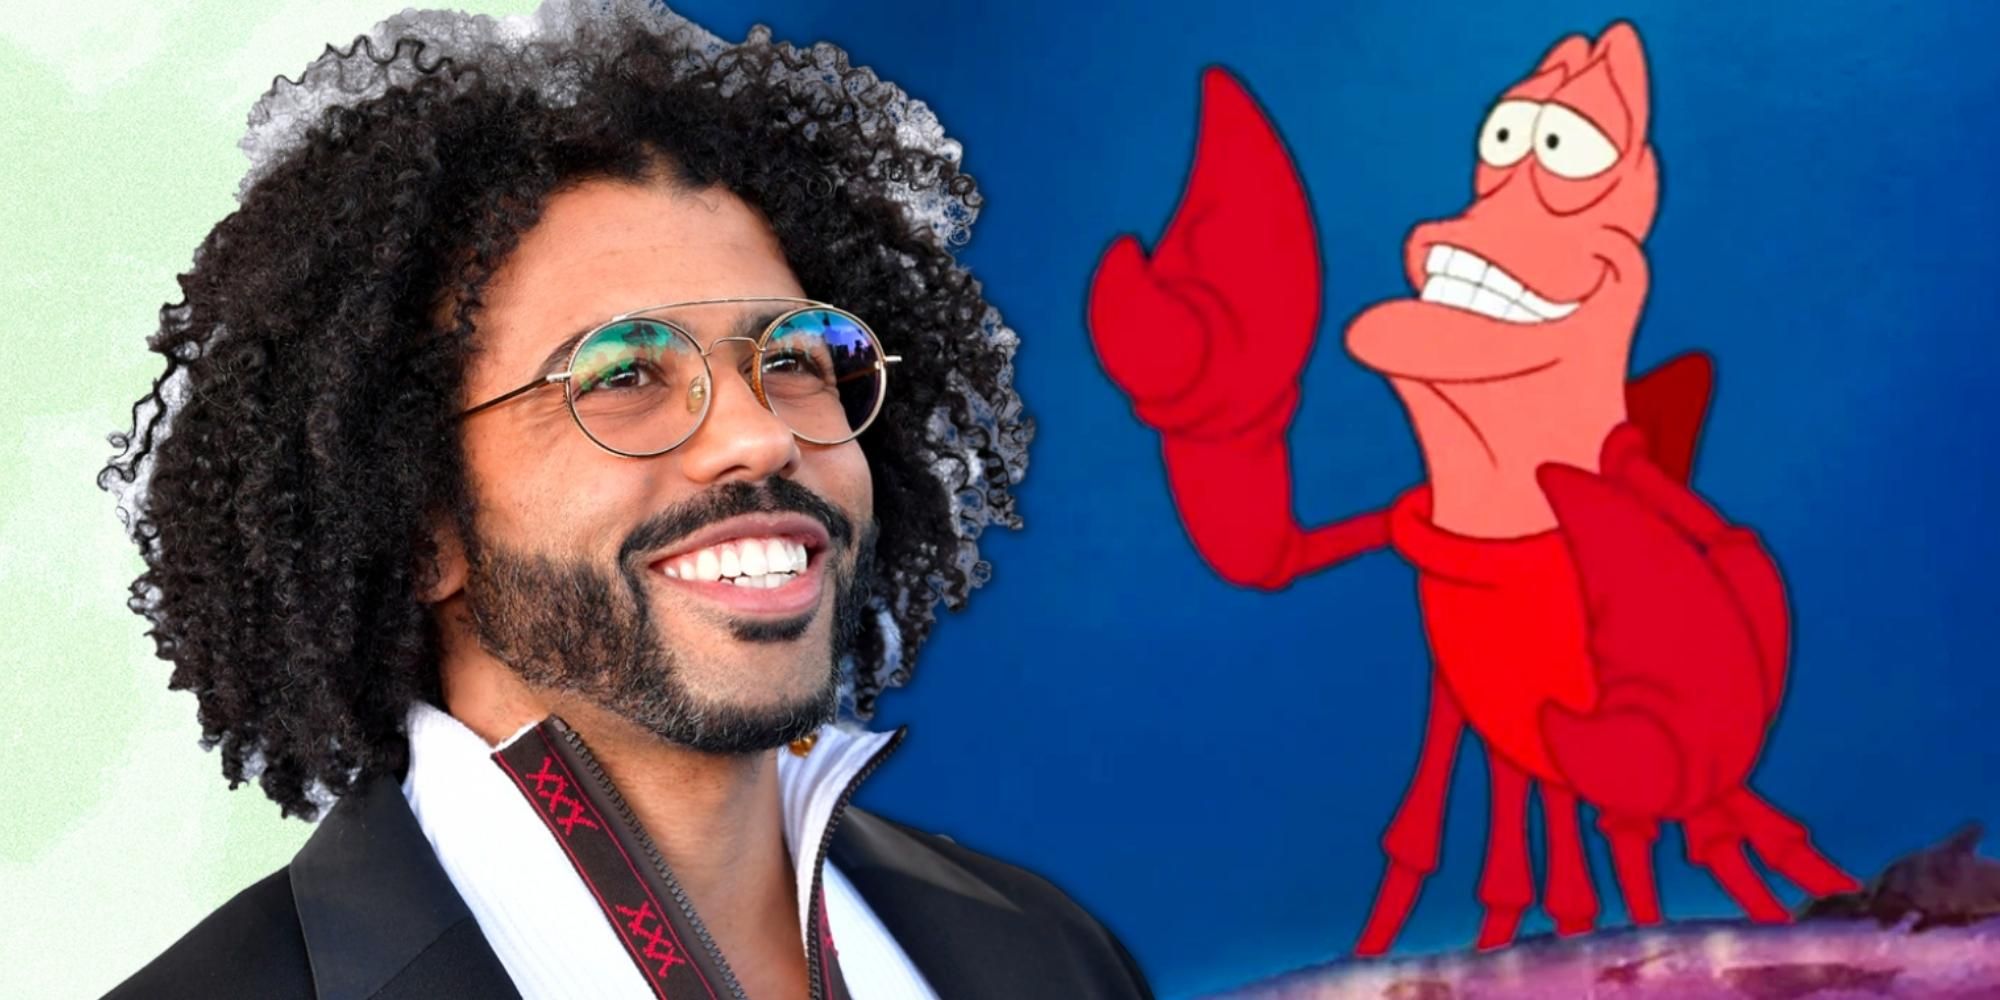 Daveed Diggs smiling in front of a still of the crab Sebastian from the Disney animated film the Little Mermaid